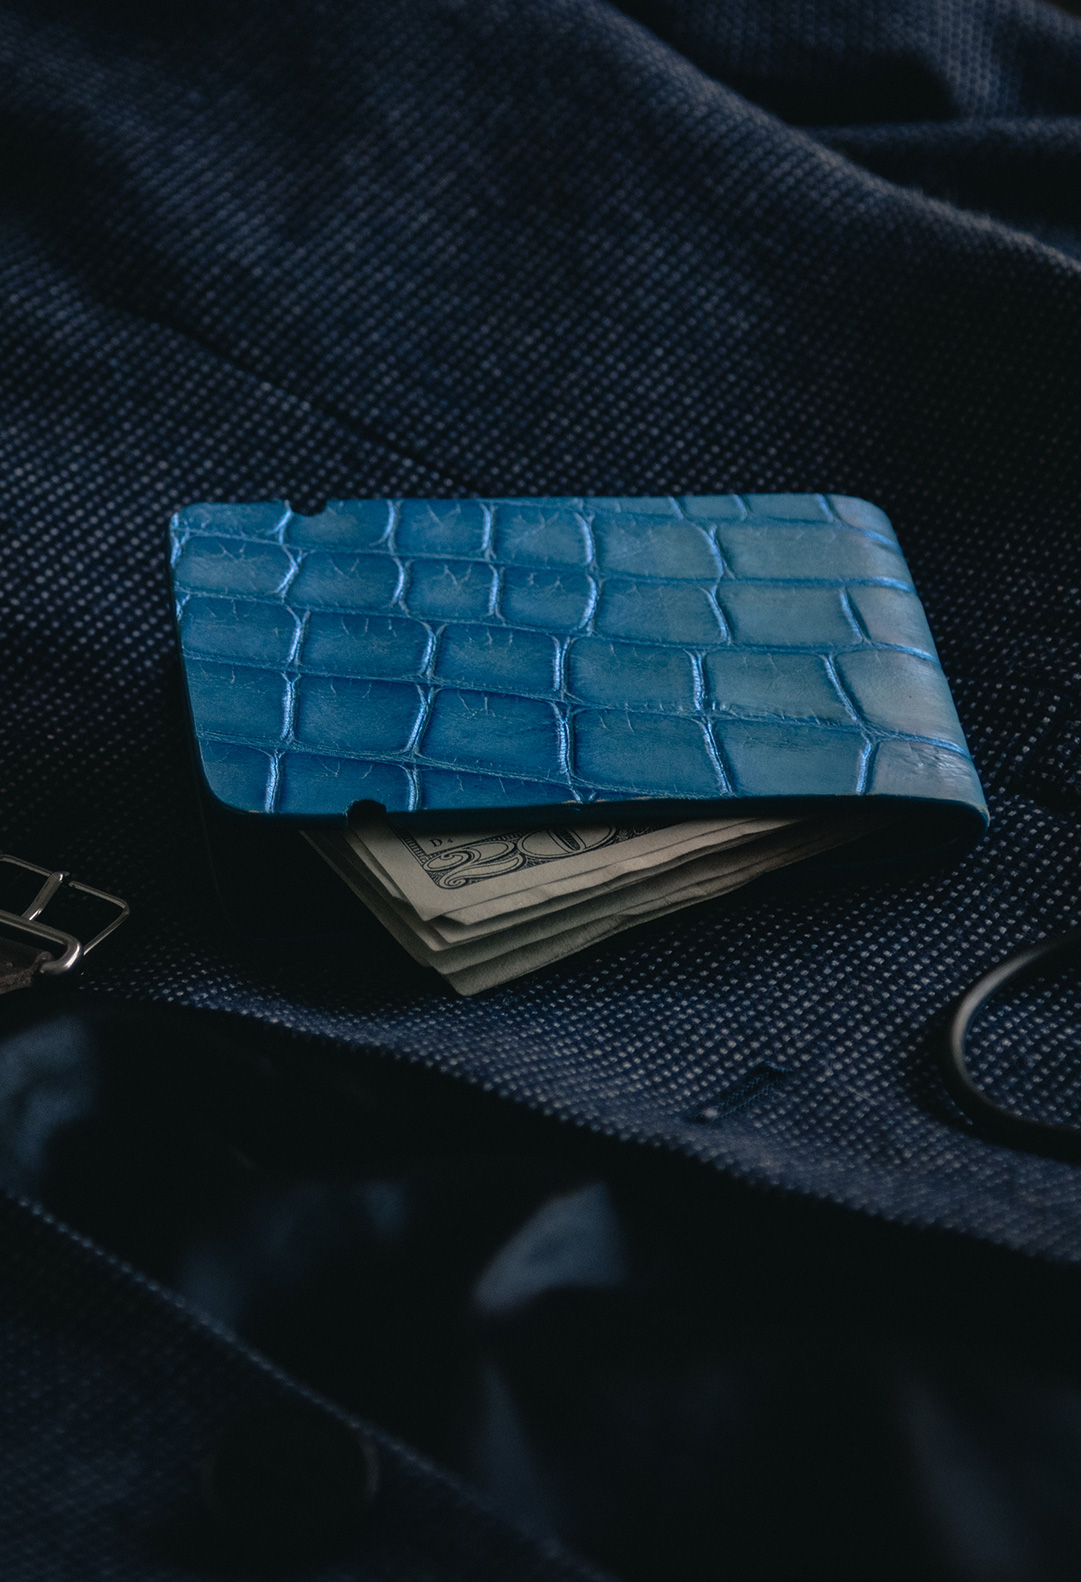 blue wallet with cash laying on suit